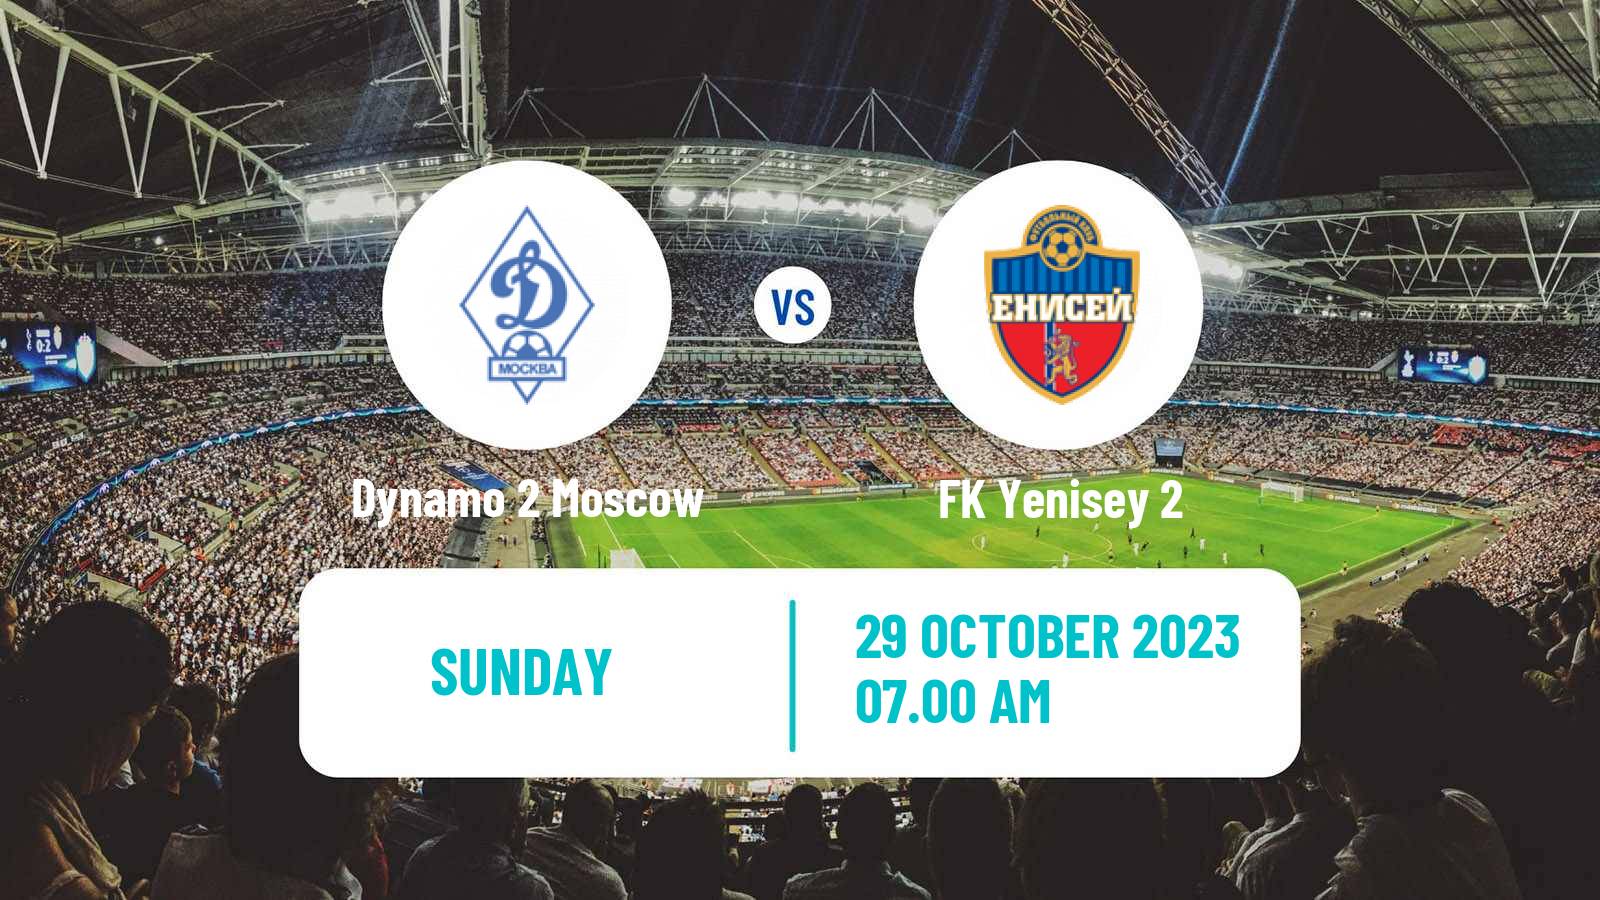 Soccer FNL 2 Division B Group 2 Dynamo 2 Moscow - Yenisey 2